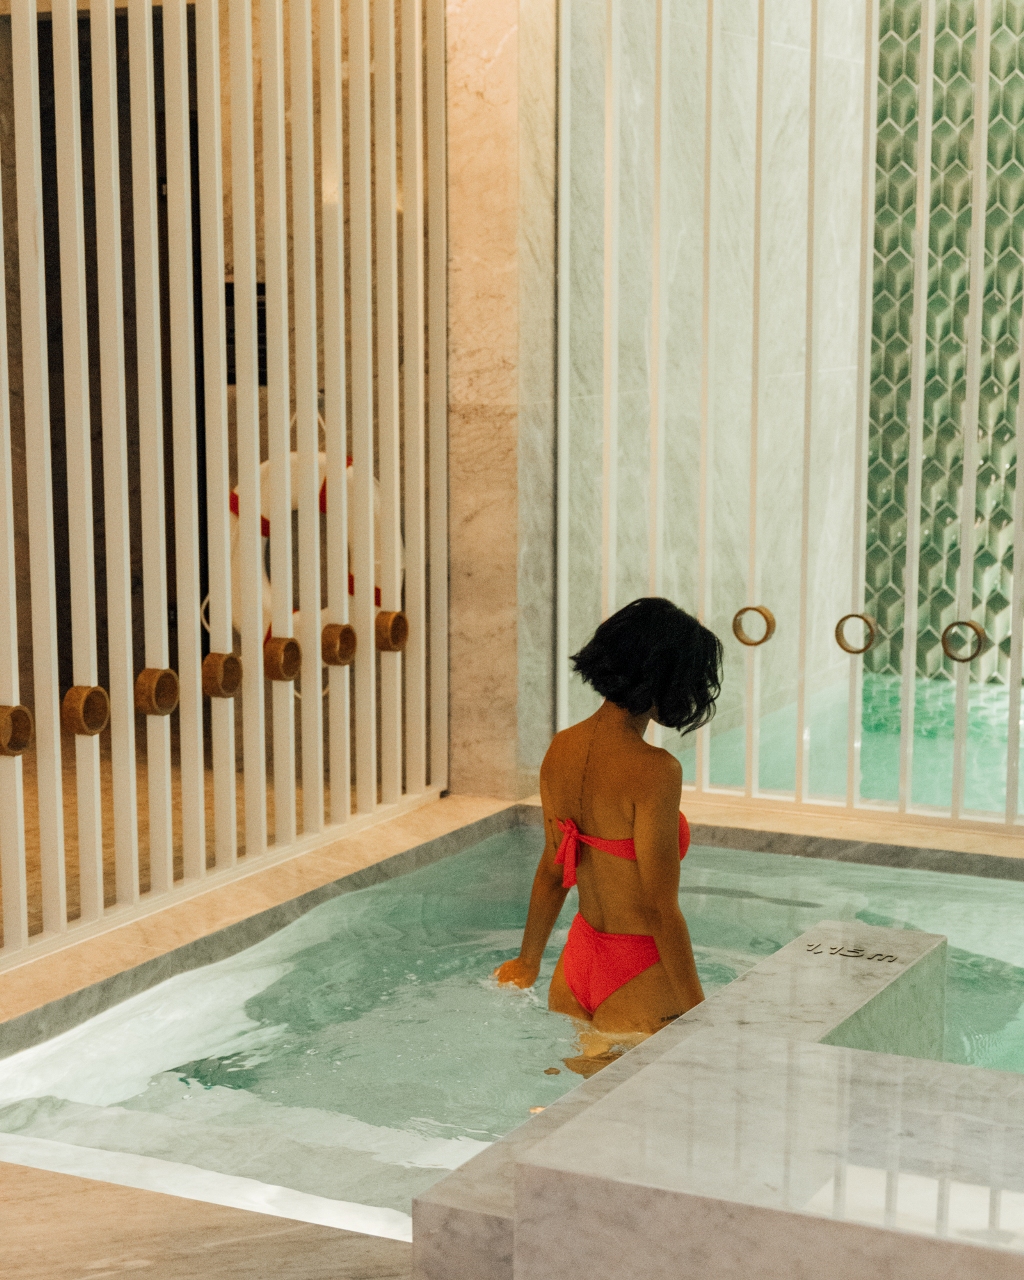 Le Monumental Nuxe Spa - Spas, saunas and hot springs